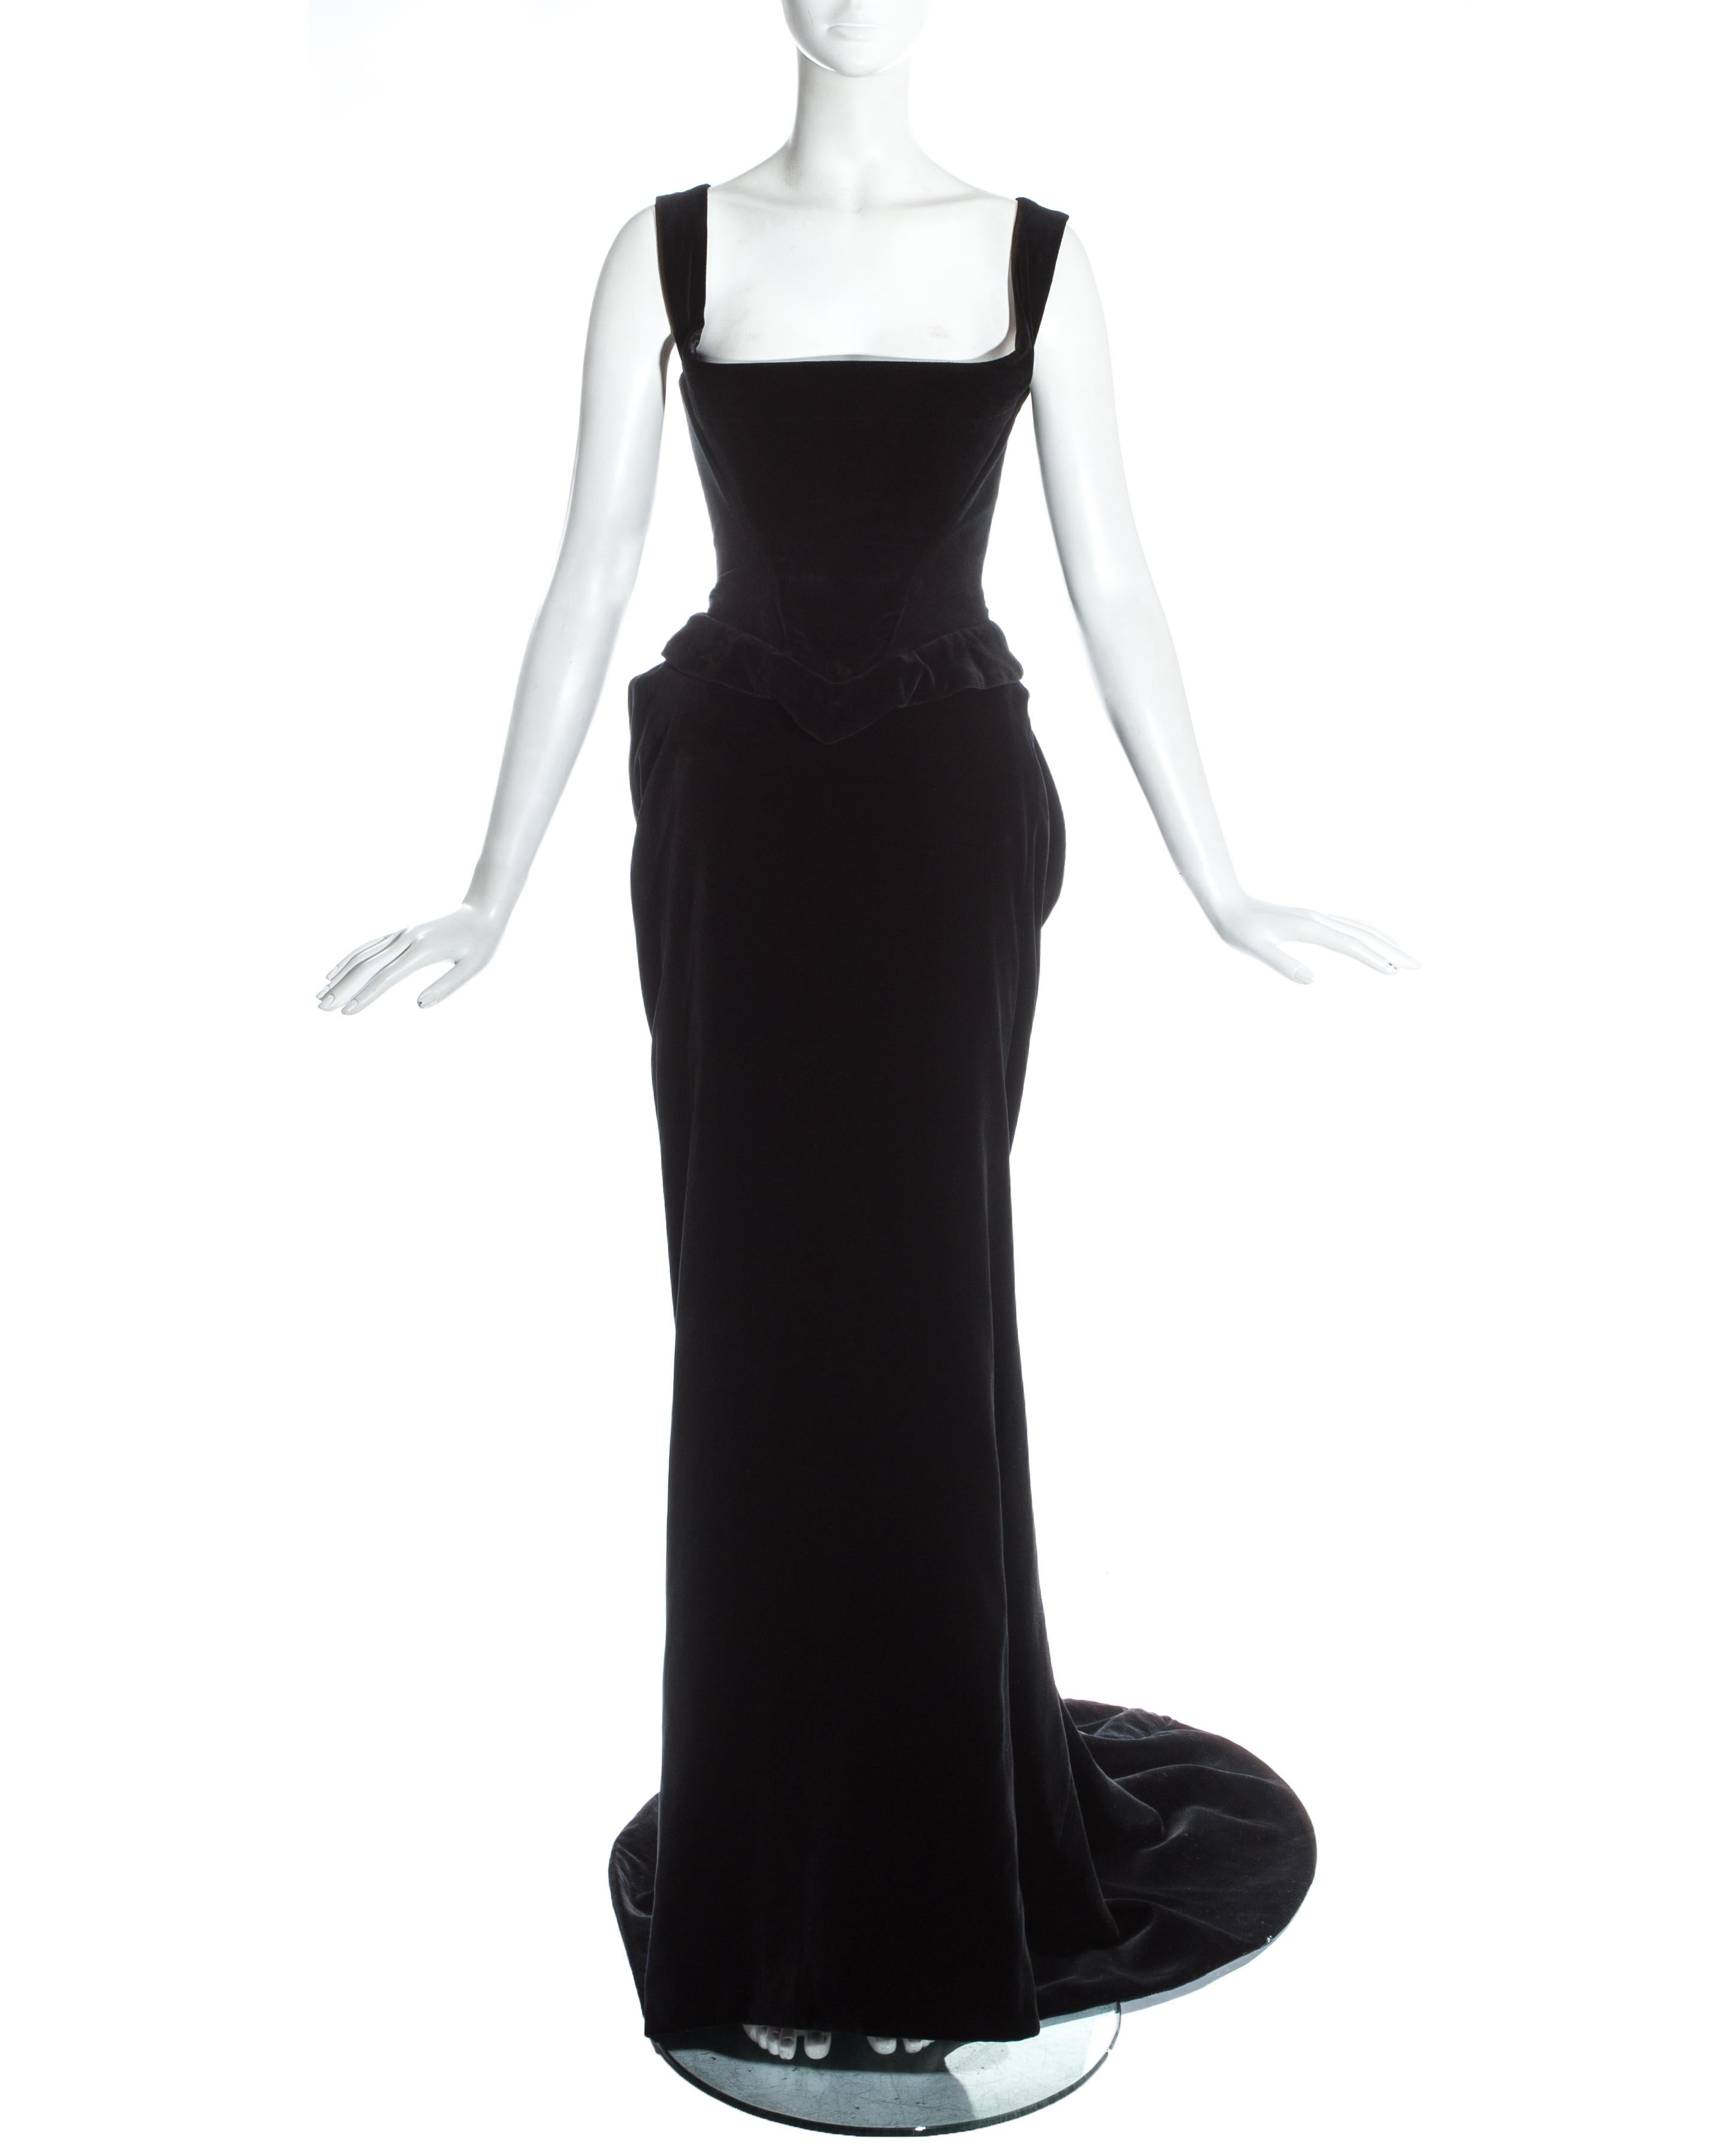 Vivienne Westwood black velvet evening ensemble. Full length skirt with train and draped bustle at the rear. Boned matching corset designed to chinch the waist and push the breasts up.

Fall-Winter 1996